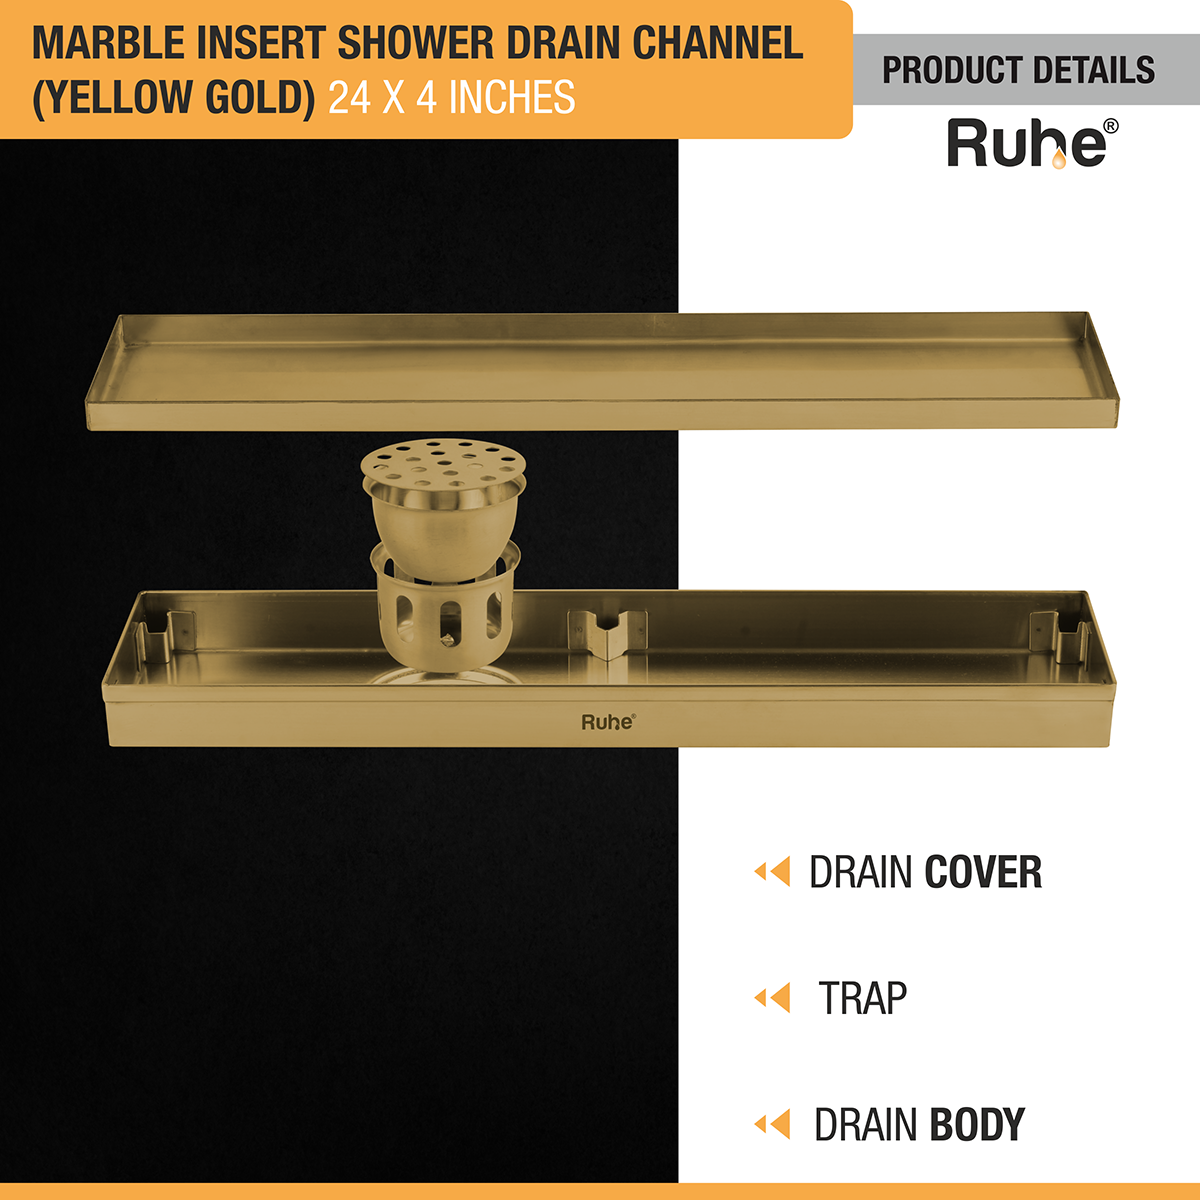 Marble Insert Shower Drain Channel (24 x 4 Inches) YELLOW GOLD PVD Coated with drain cover, trap, and drain body